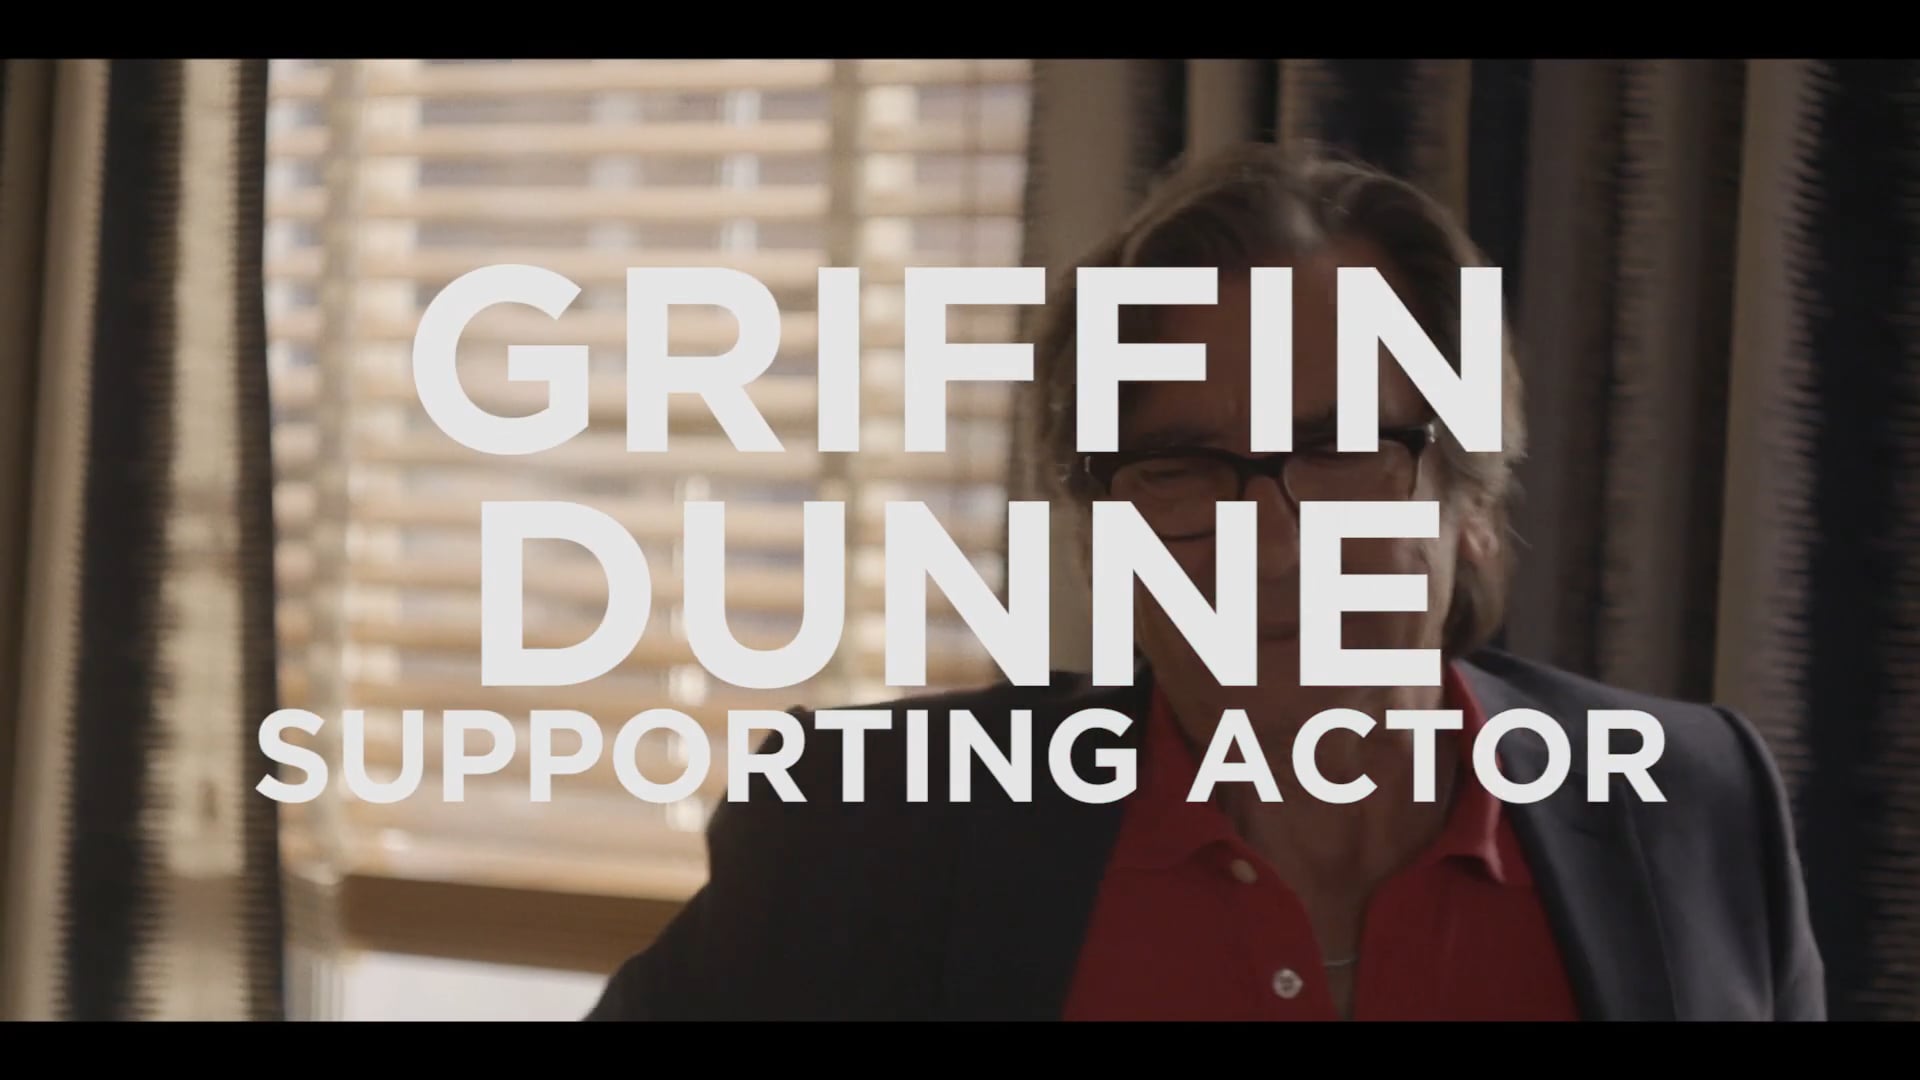 I LOVE DICK - GRIFFIN DUNNE